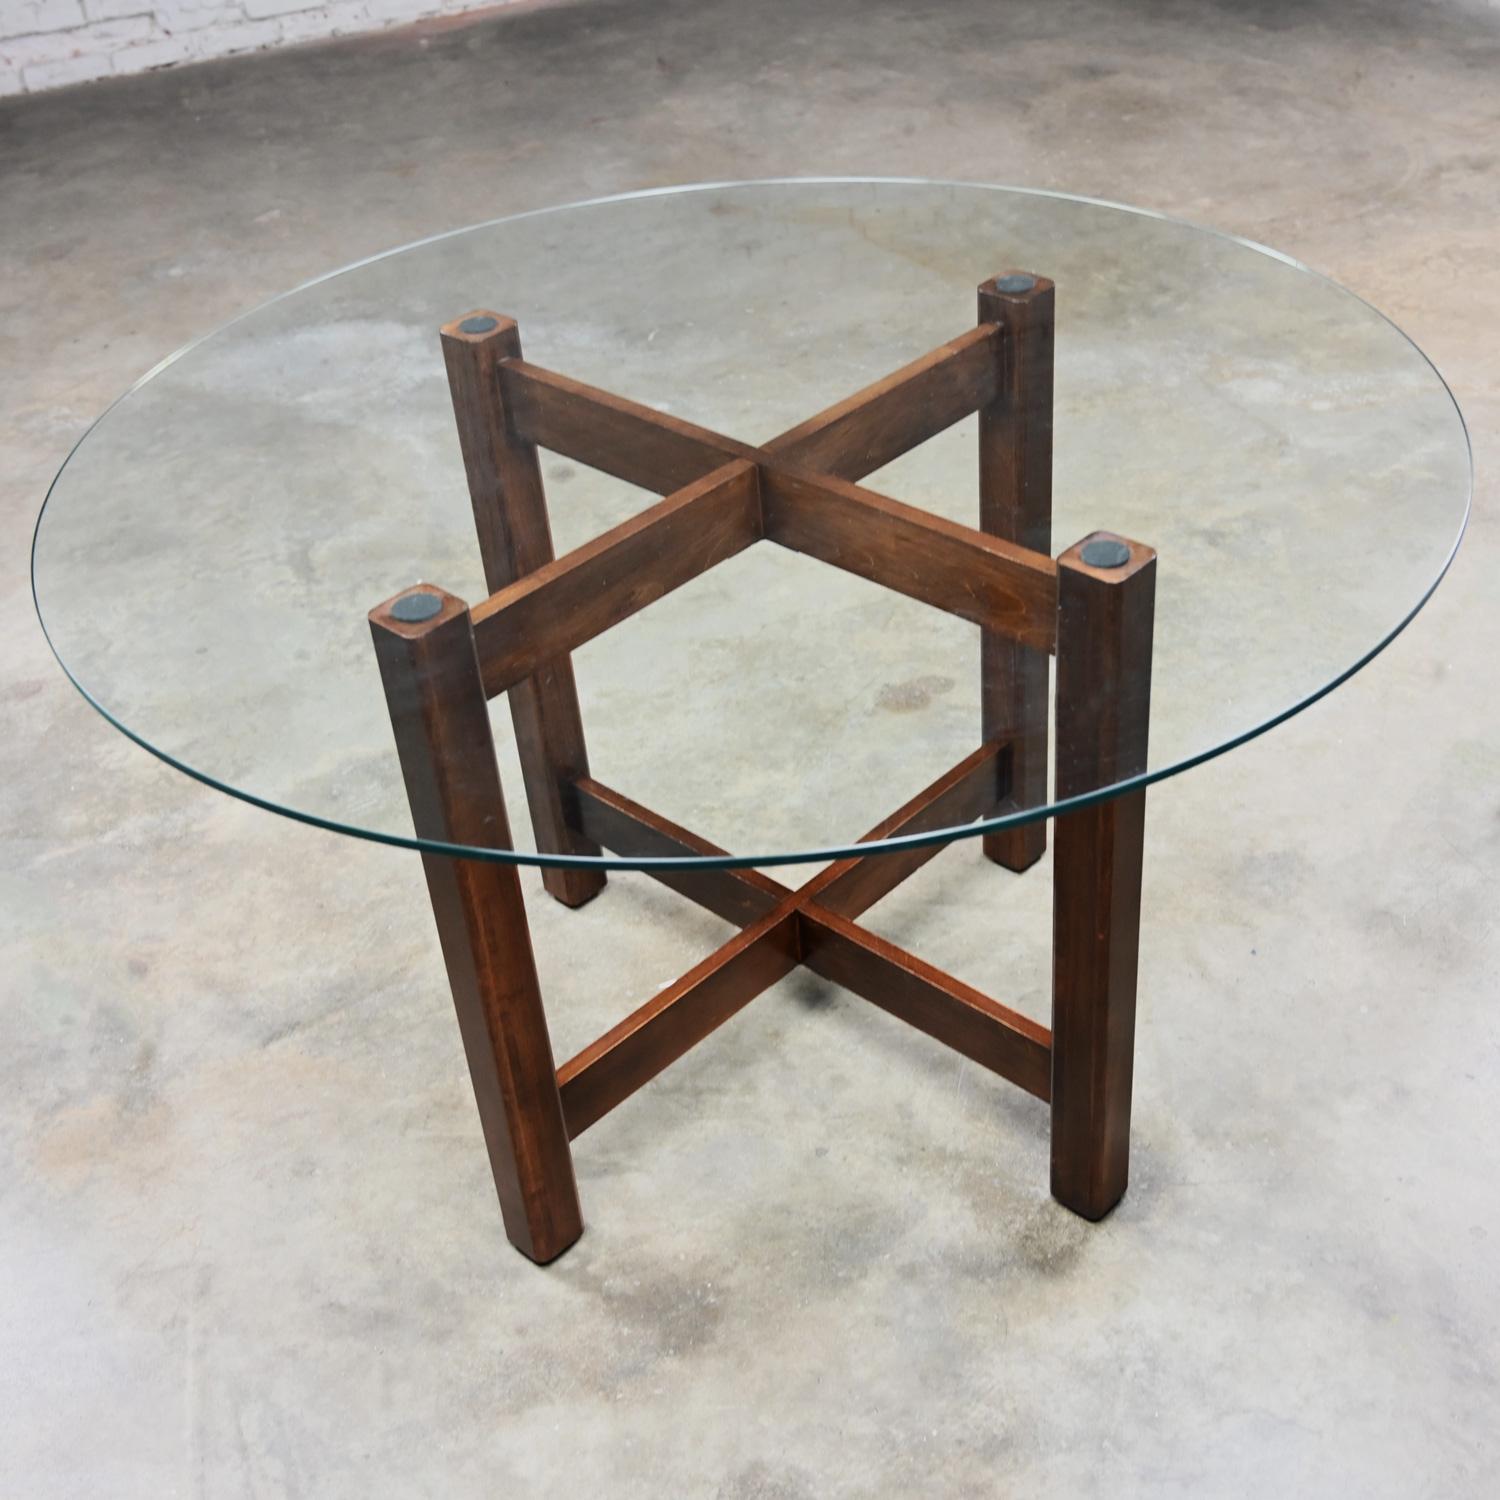 Handsome Late 20th Century Modern walnut X-base dining table with new round tempered glass top with flat polished edge. Beautiful condition, keeping in mind that this is vintage and not new so will have signs of use and wear even if it has been